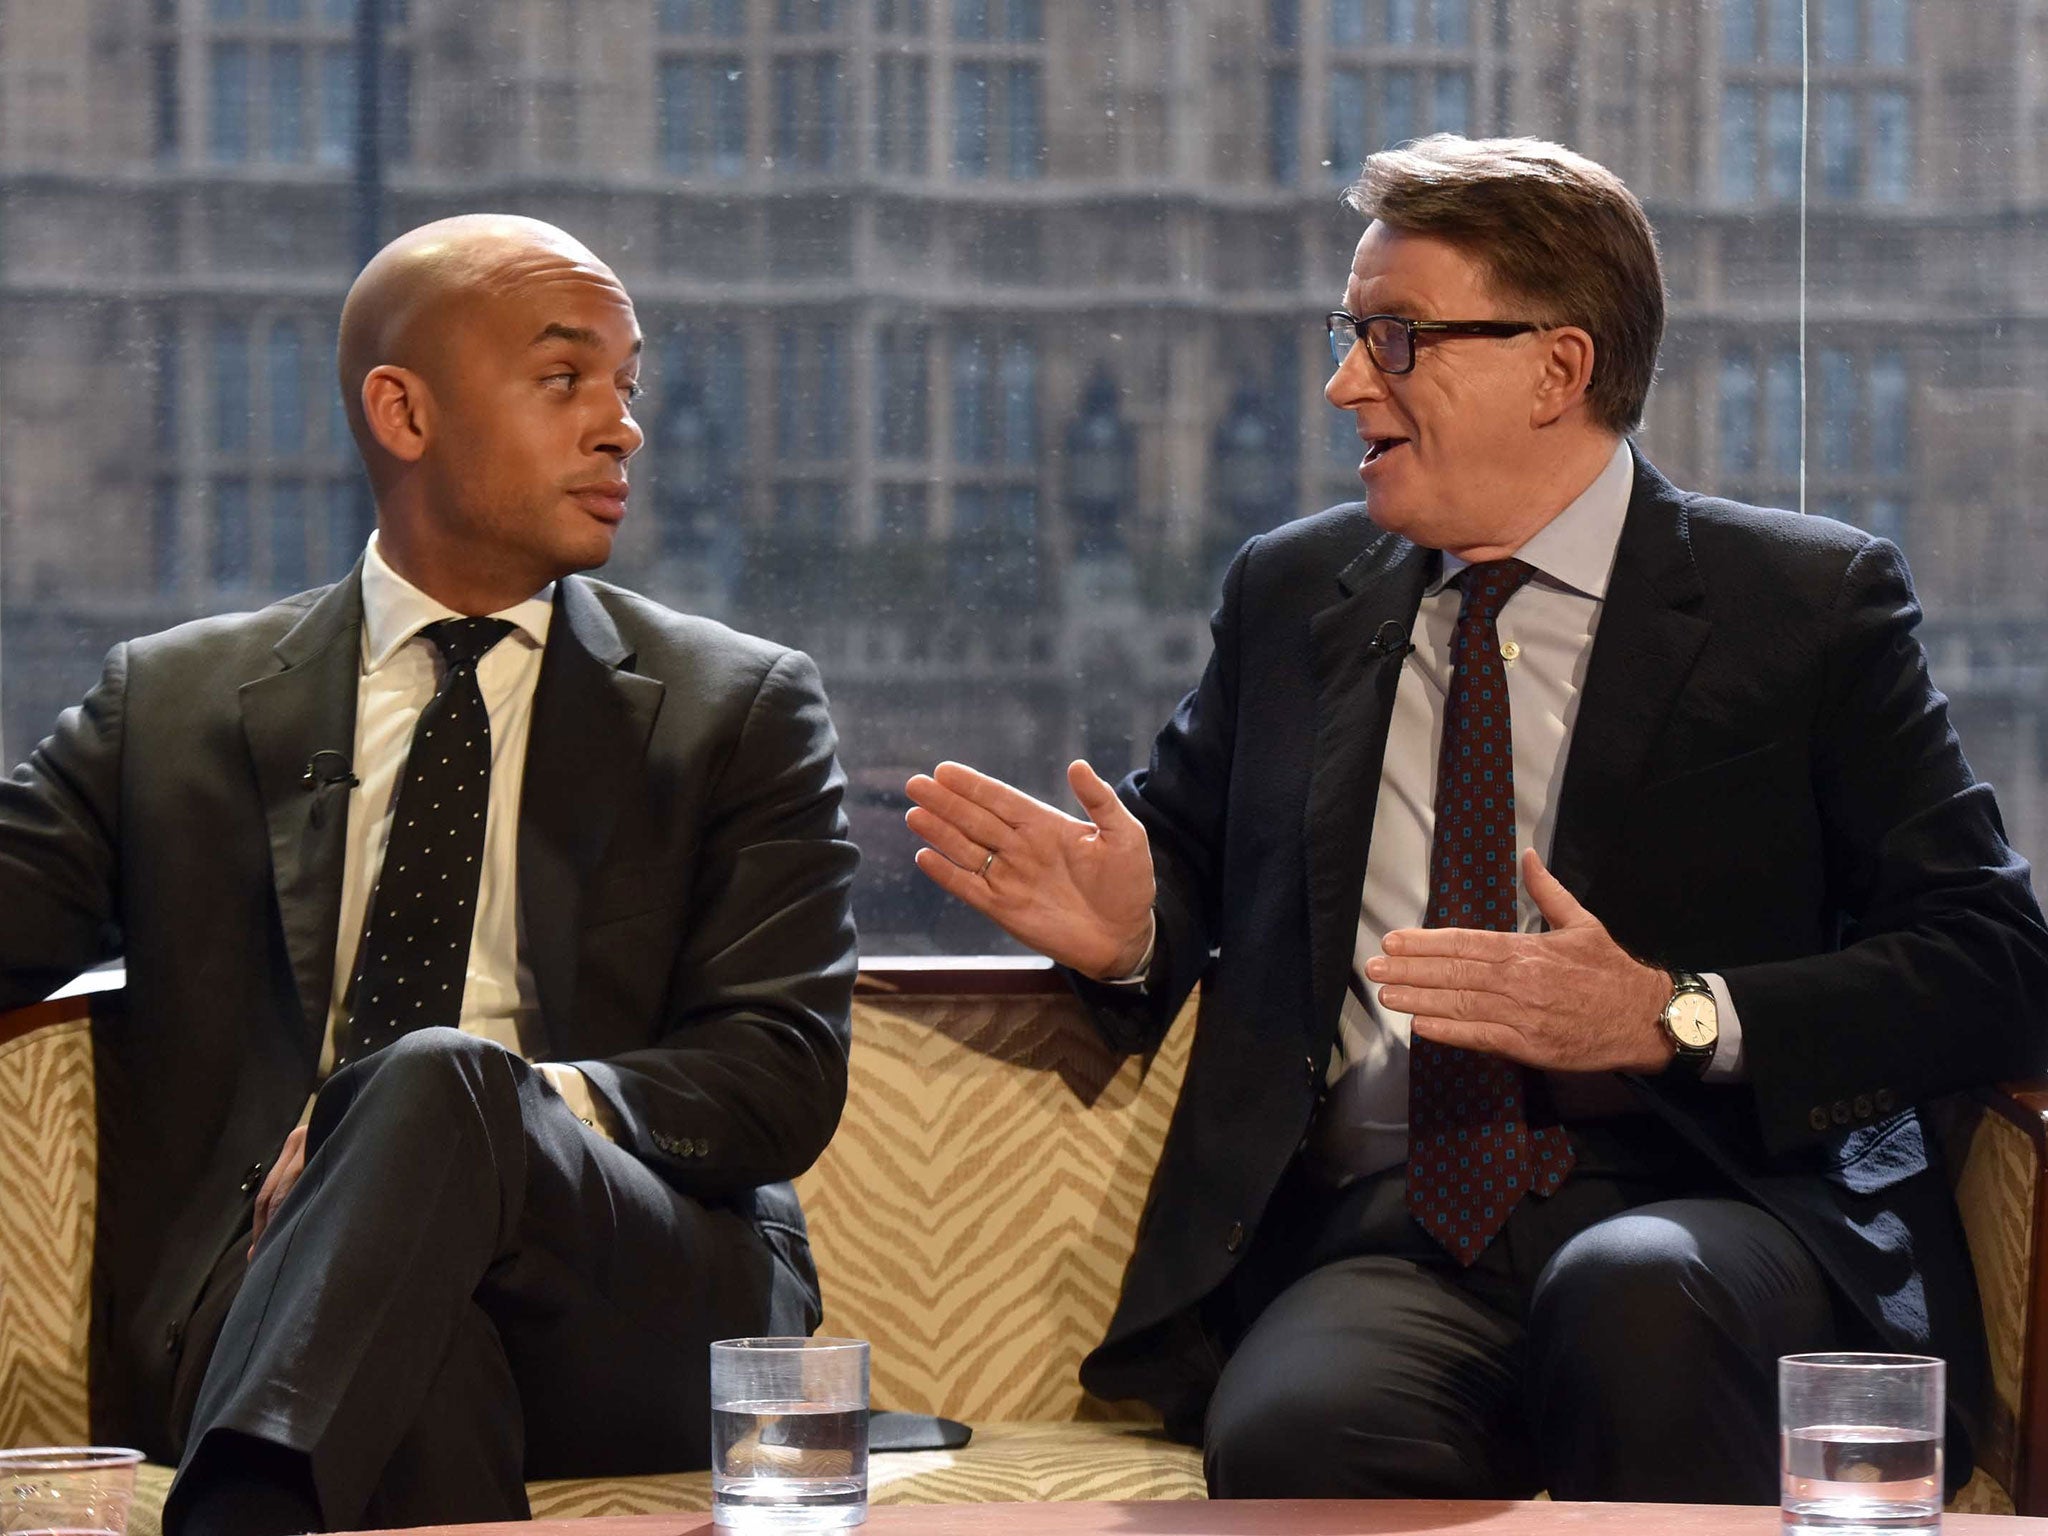 Shadow Business Secretary Chuka Umunna (left) and Lord Mandelson appearing on BBC One's The Andrew Marr Show